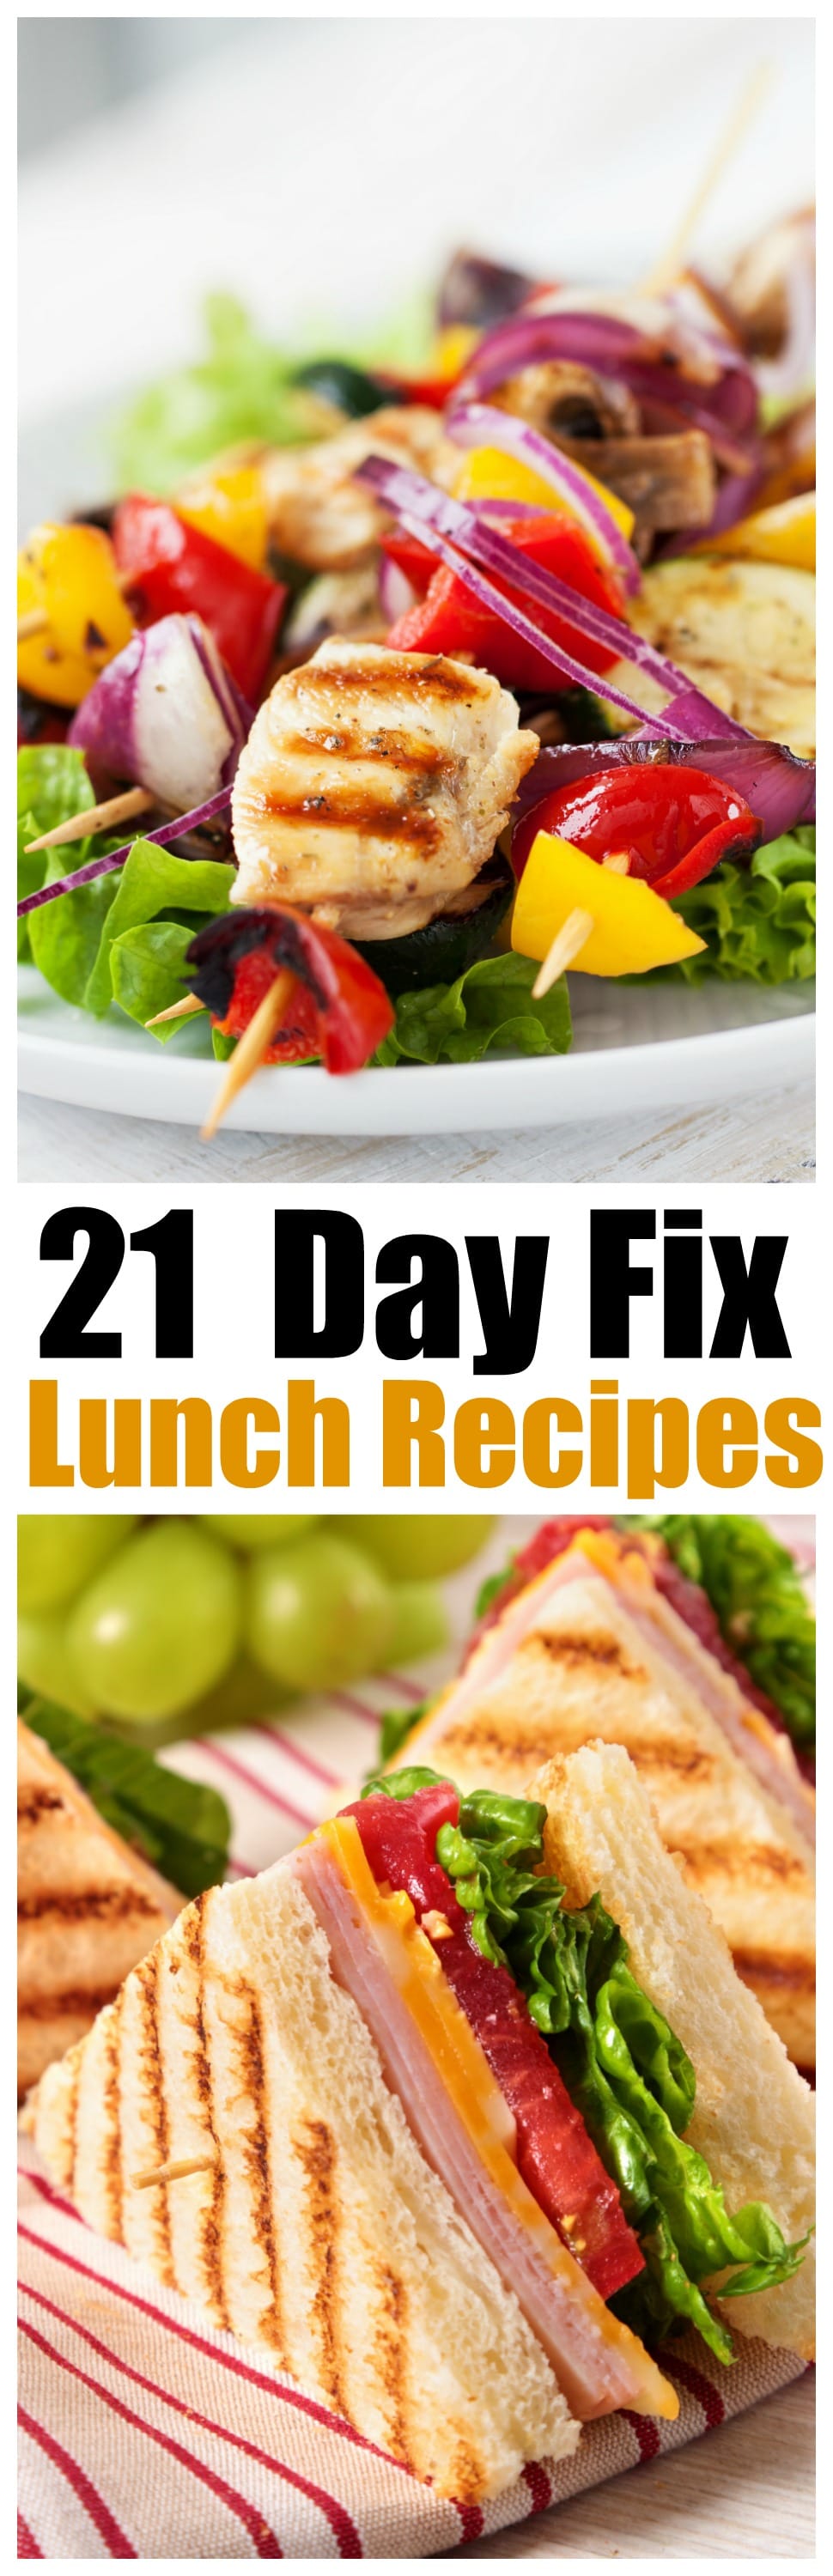 21-Day Fix Lunch Recipes featuring grilled chicken, fresh vegetables, and savory seasonings.